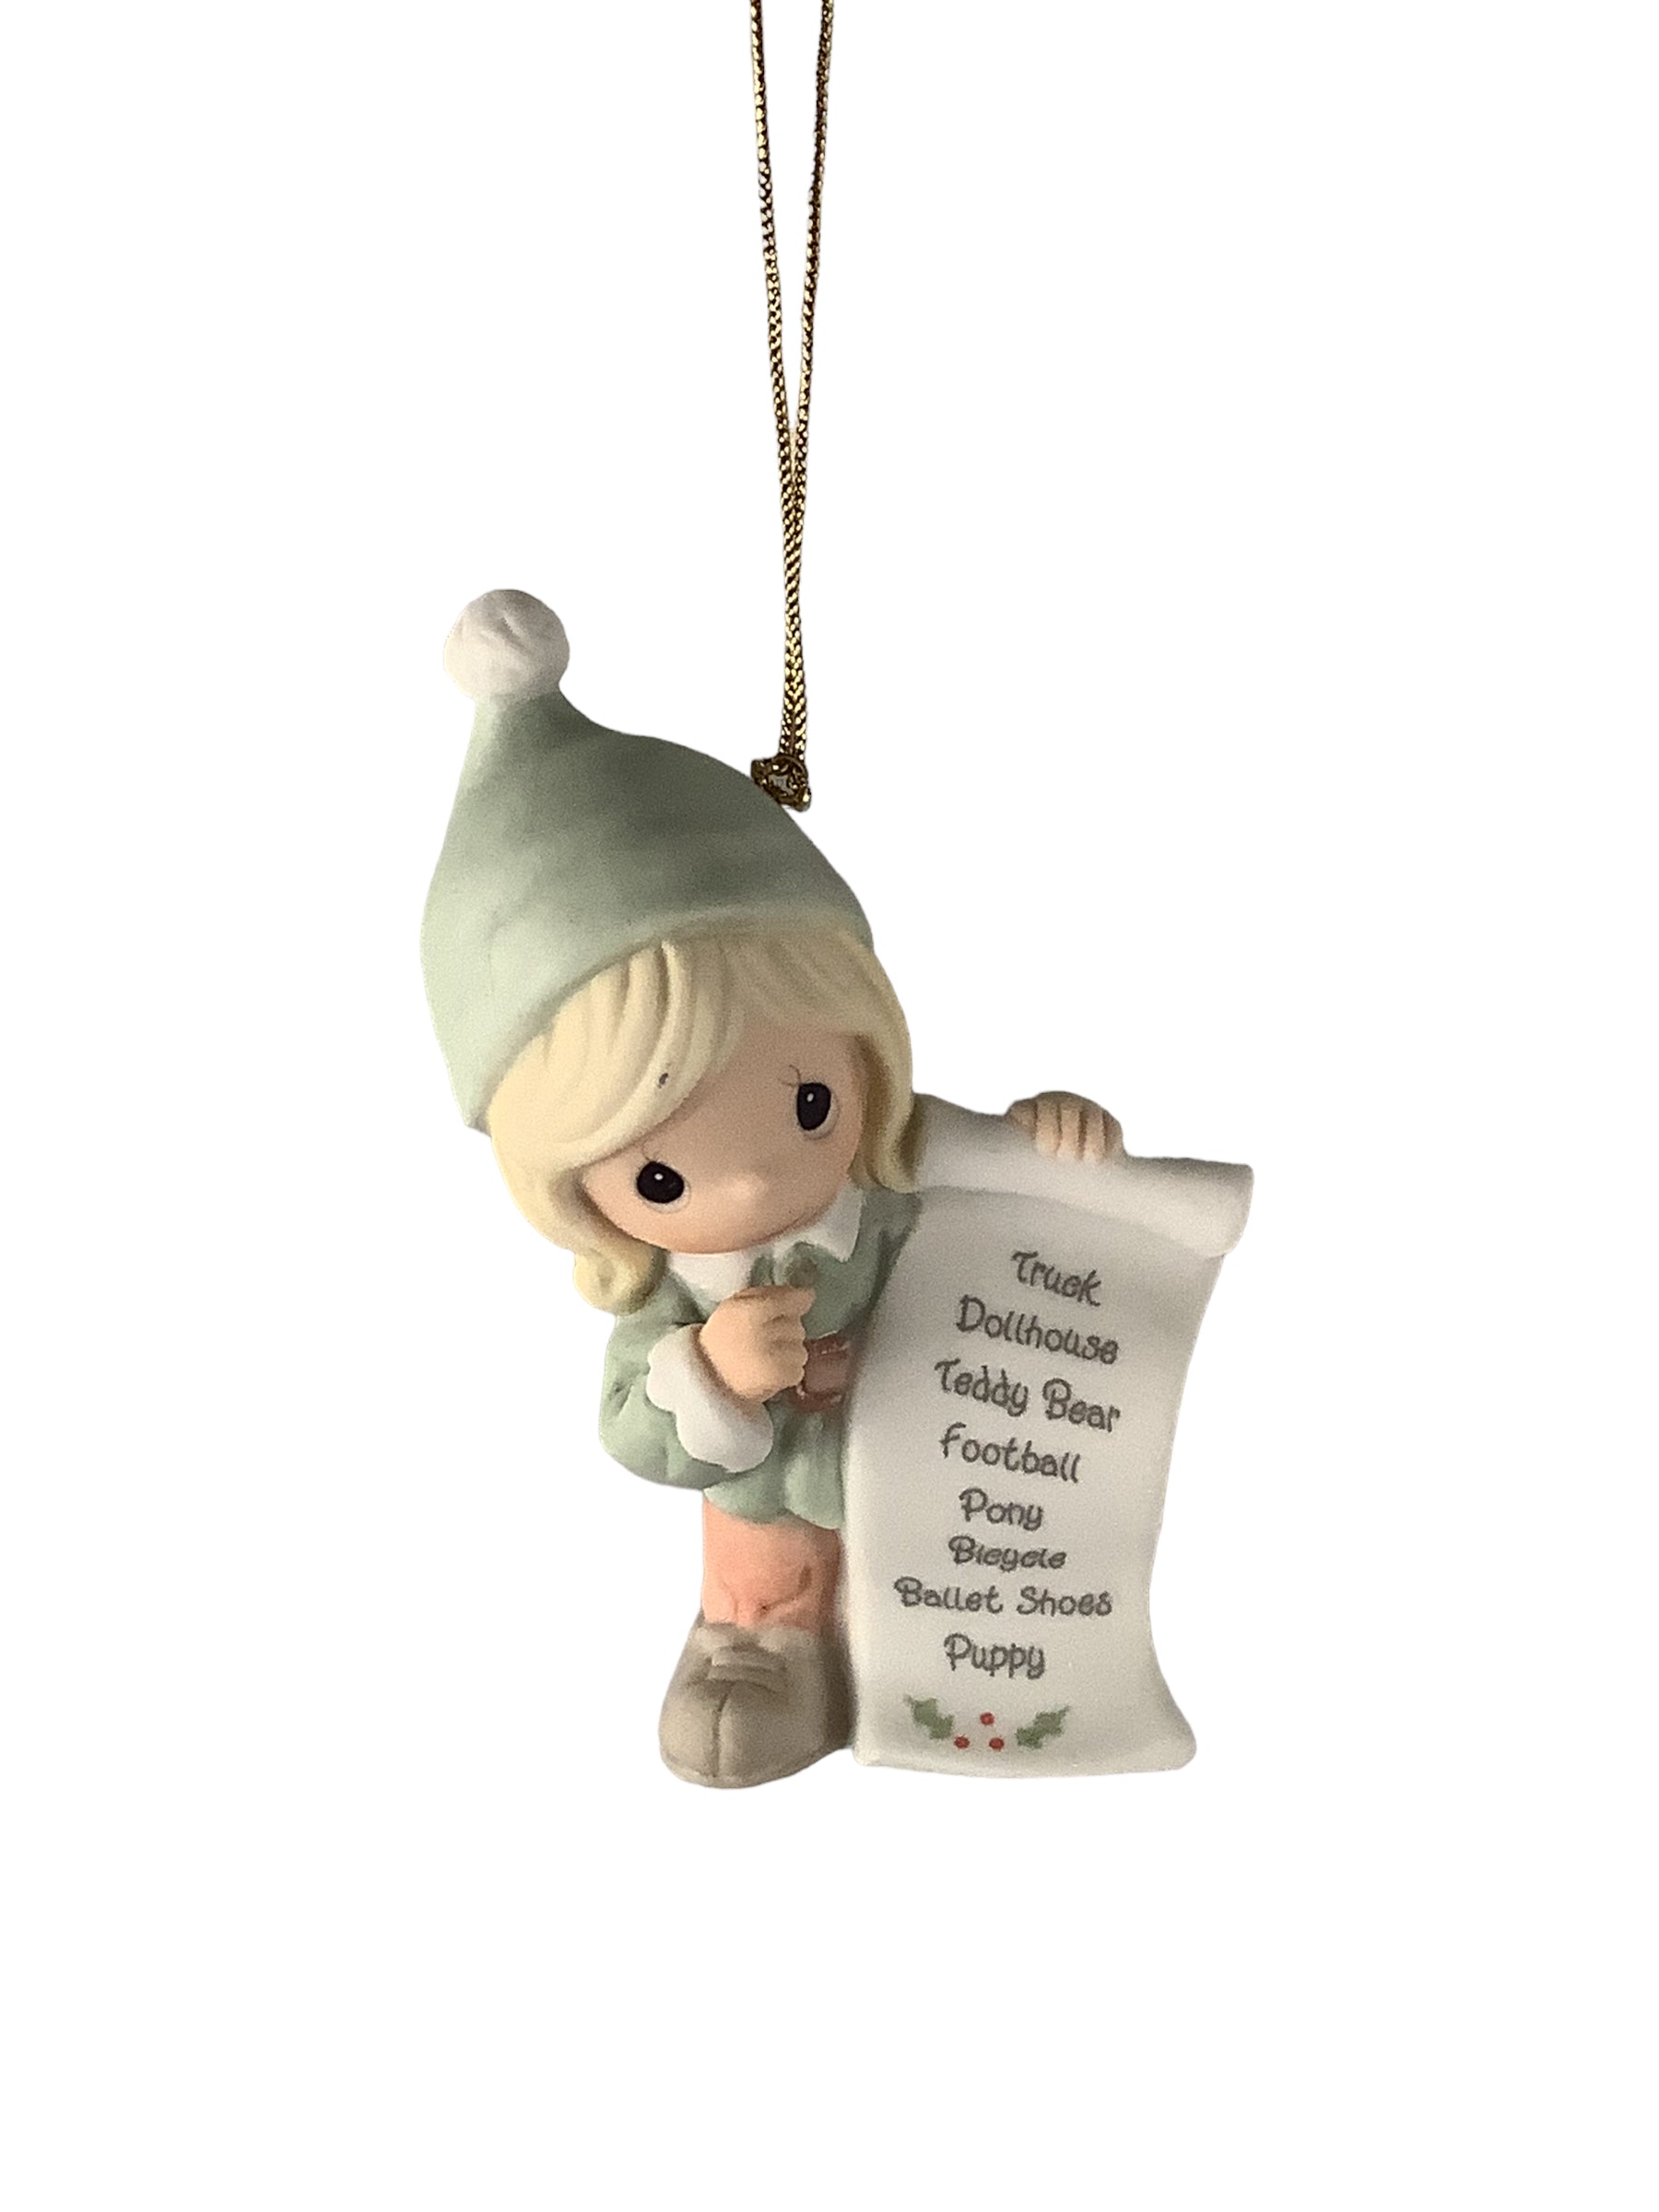 For All The Good Boys And Girls - Precious Moment Ornament